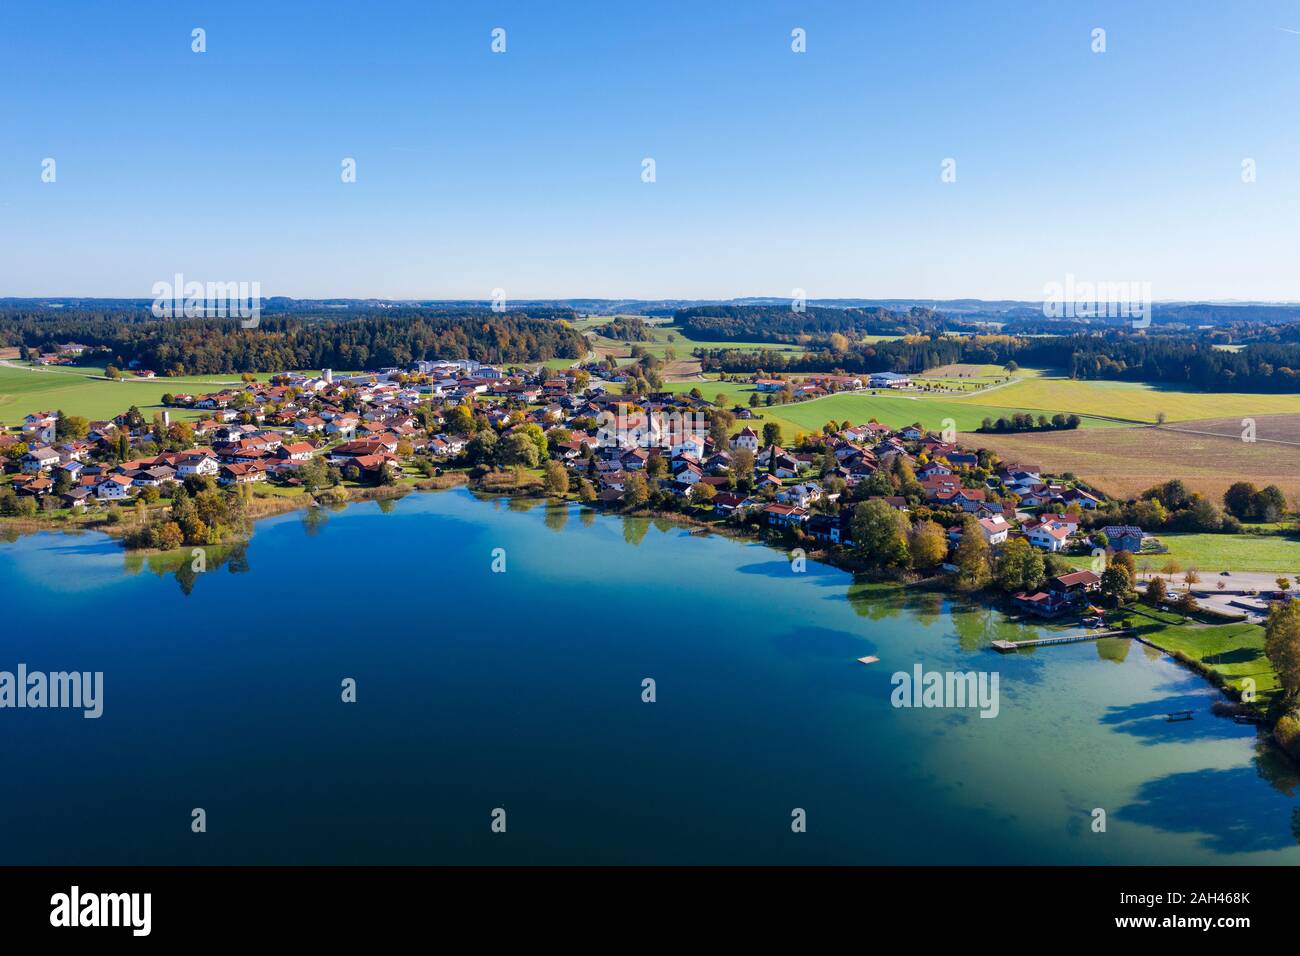 Germany, Bavaria, Seeon-Seebruck, Aerial view of Klostersee and lakeside village Stock Photo